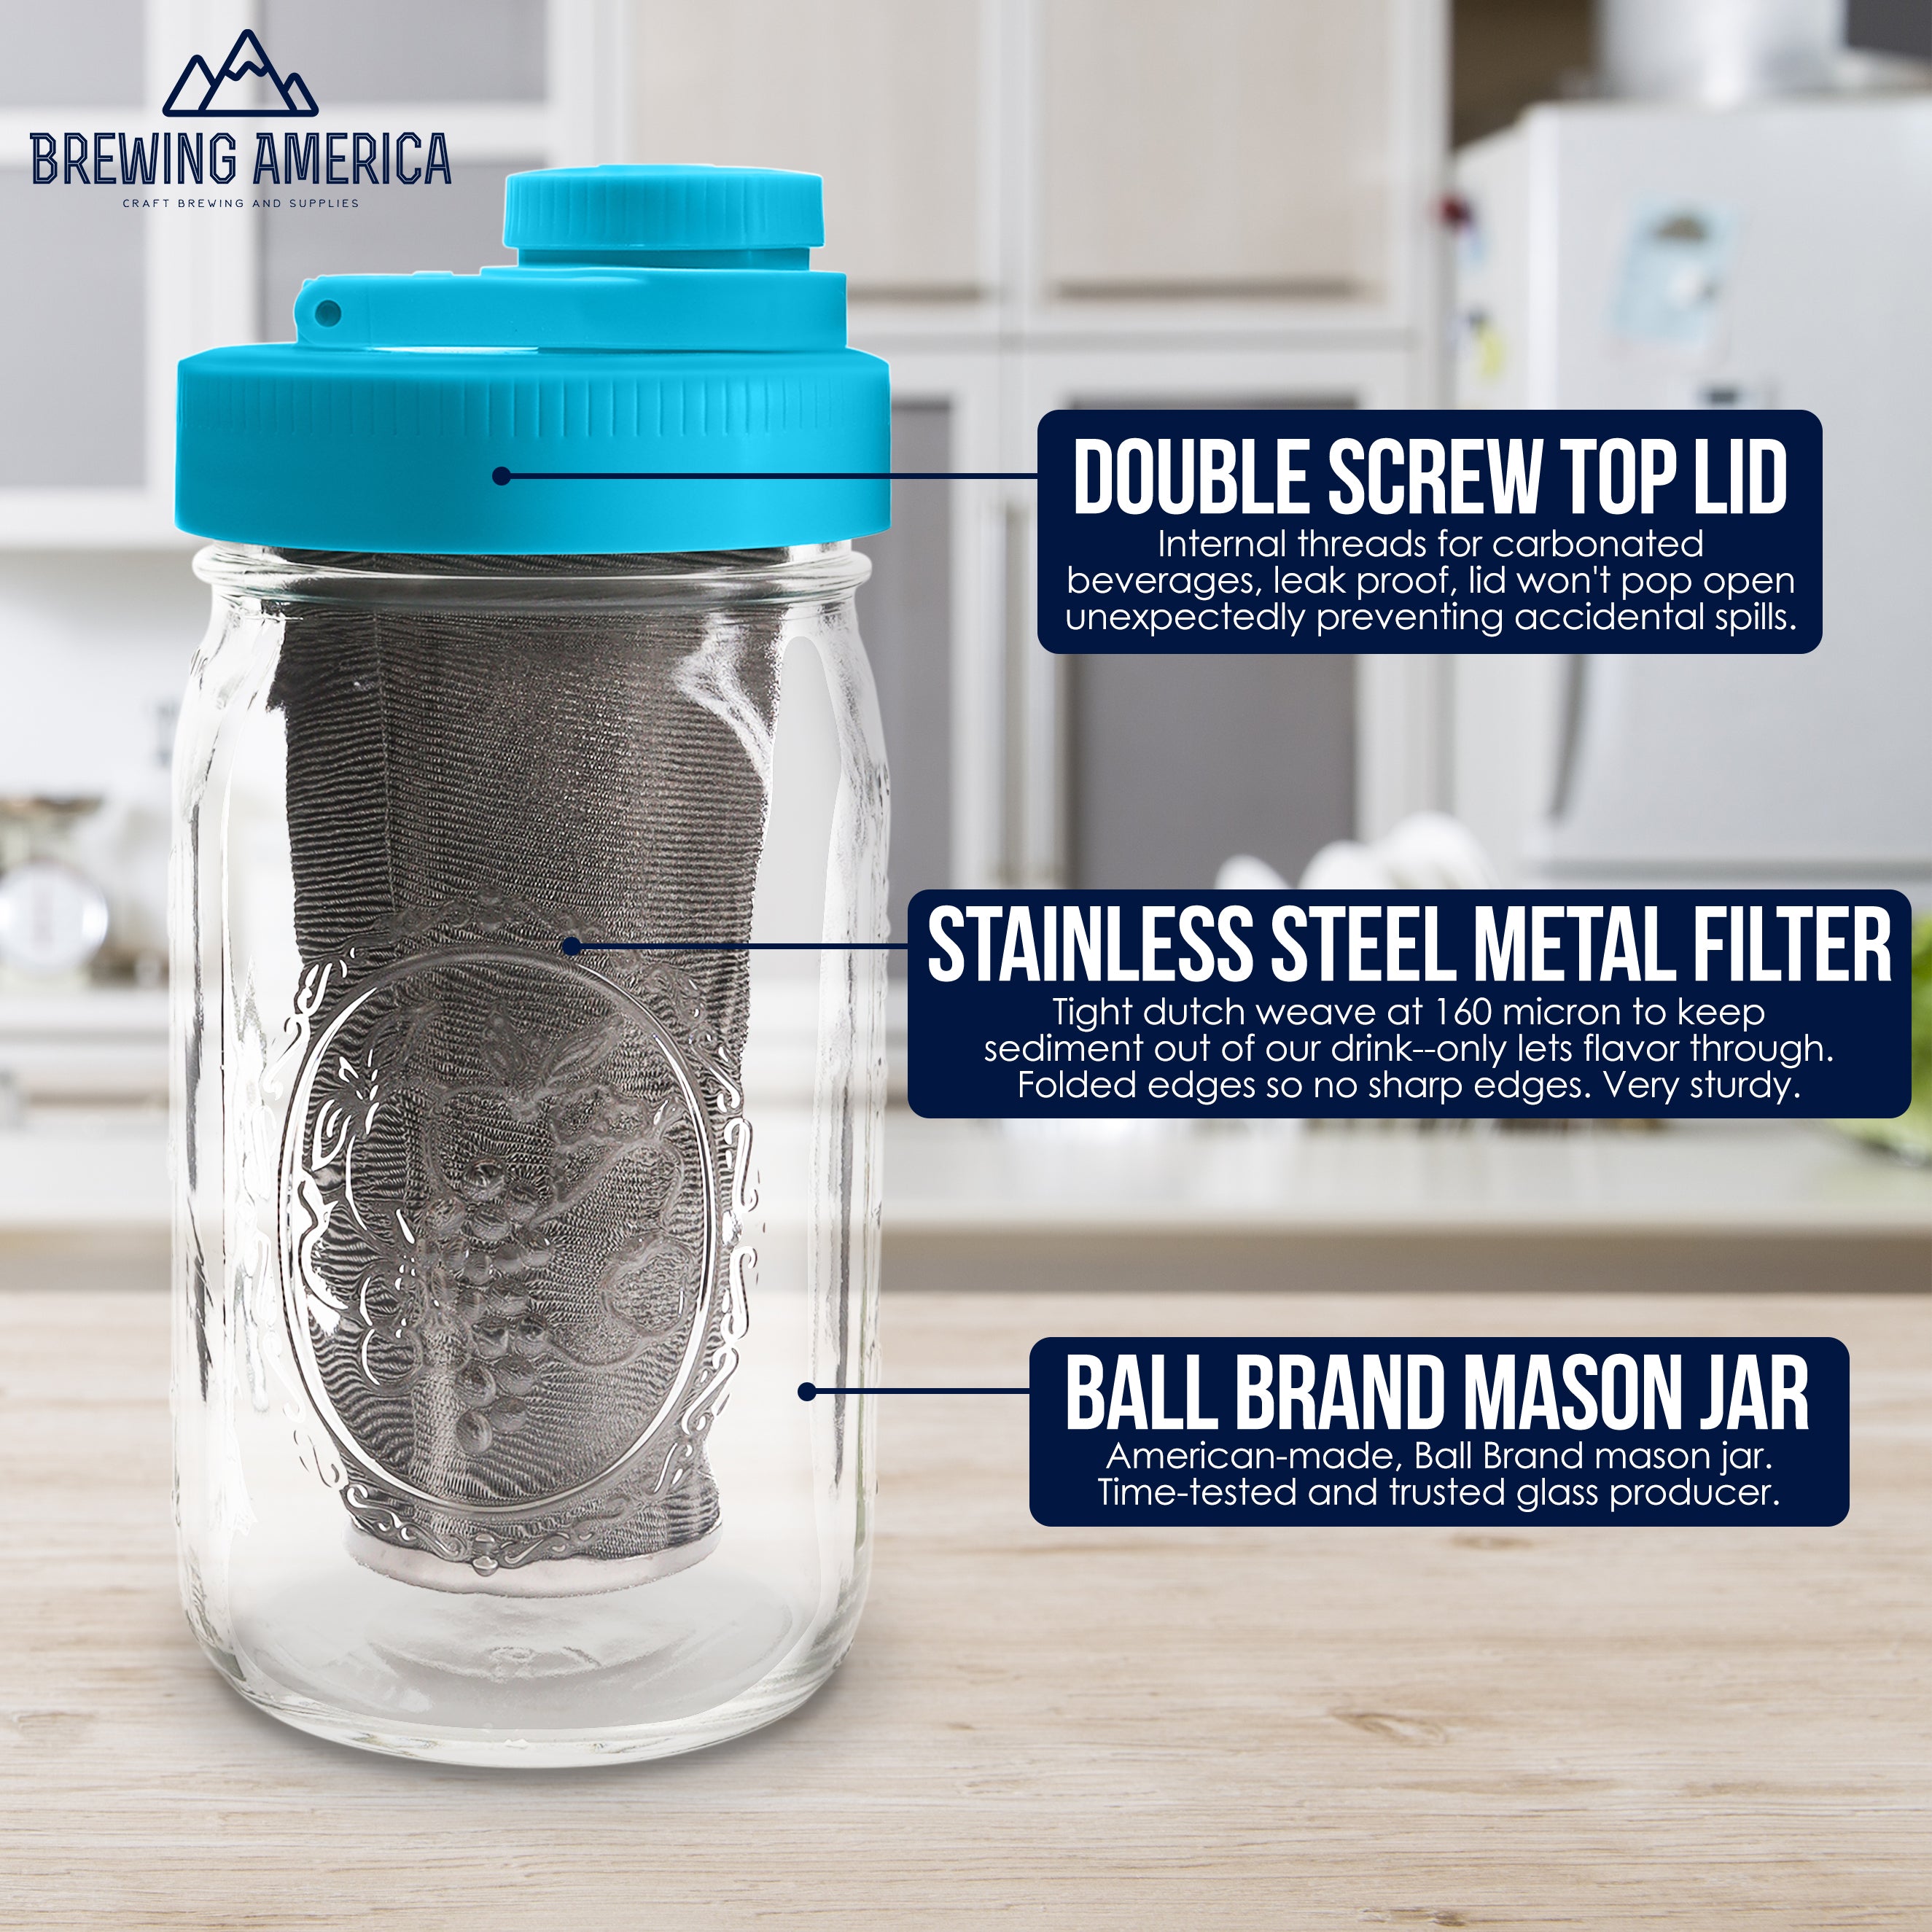 Cold Brew Coffee Maker Kit: Wide Mouth for Coffee, Infused Tea, Alcohol - 1 Quart 32 oz Teal Lid Cold Brew Coffee Maker Brewing America 